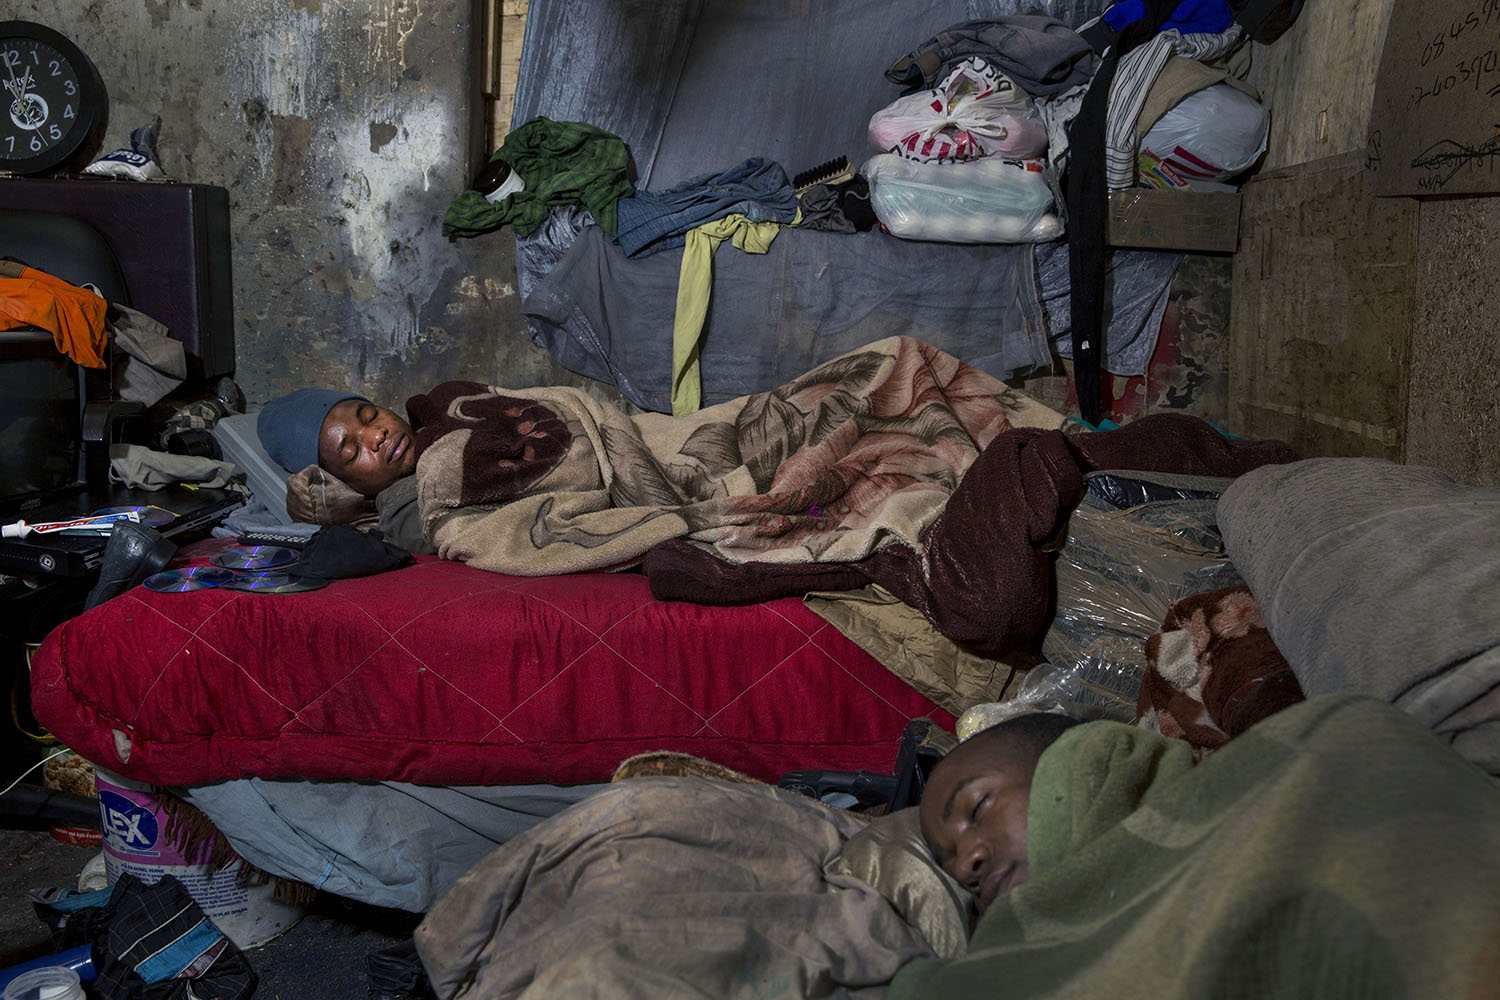 African migrants from Zimbabwe sleep in tight quarters, July 12, 2015.